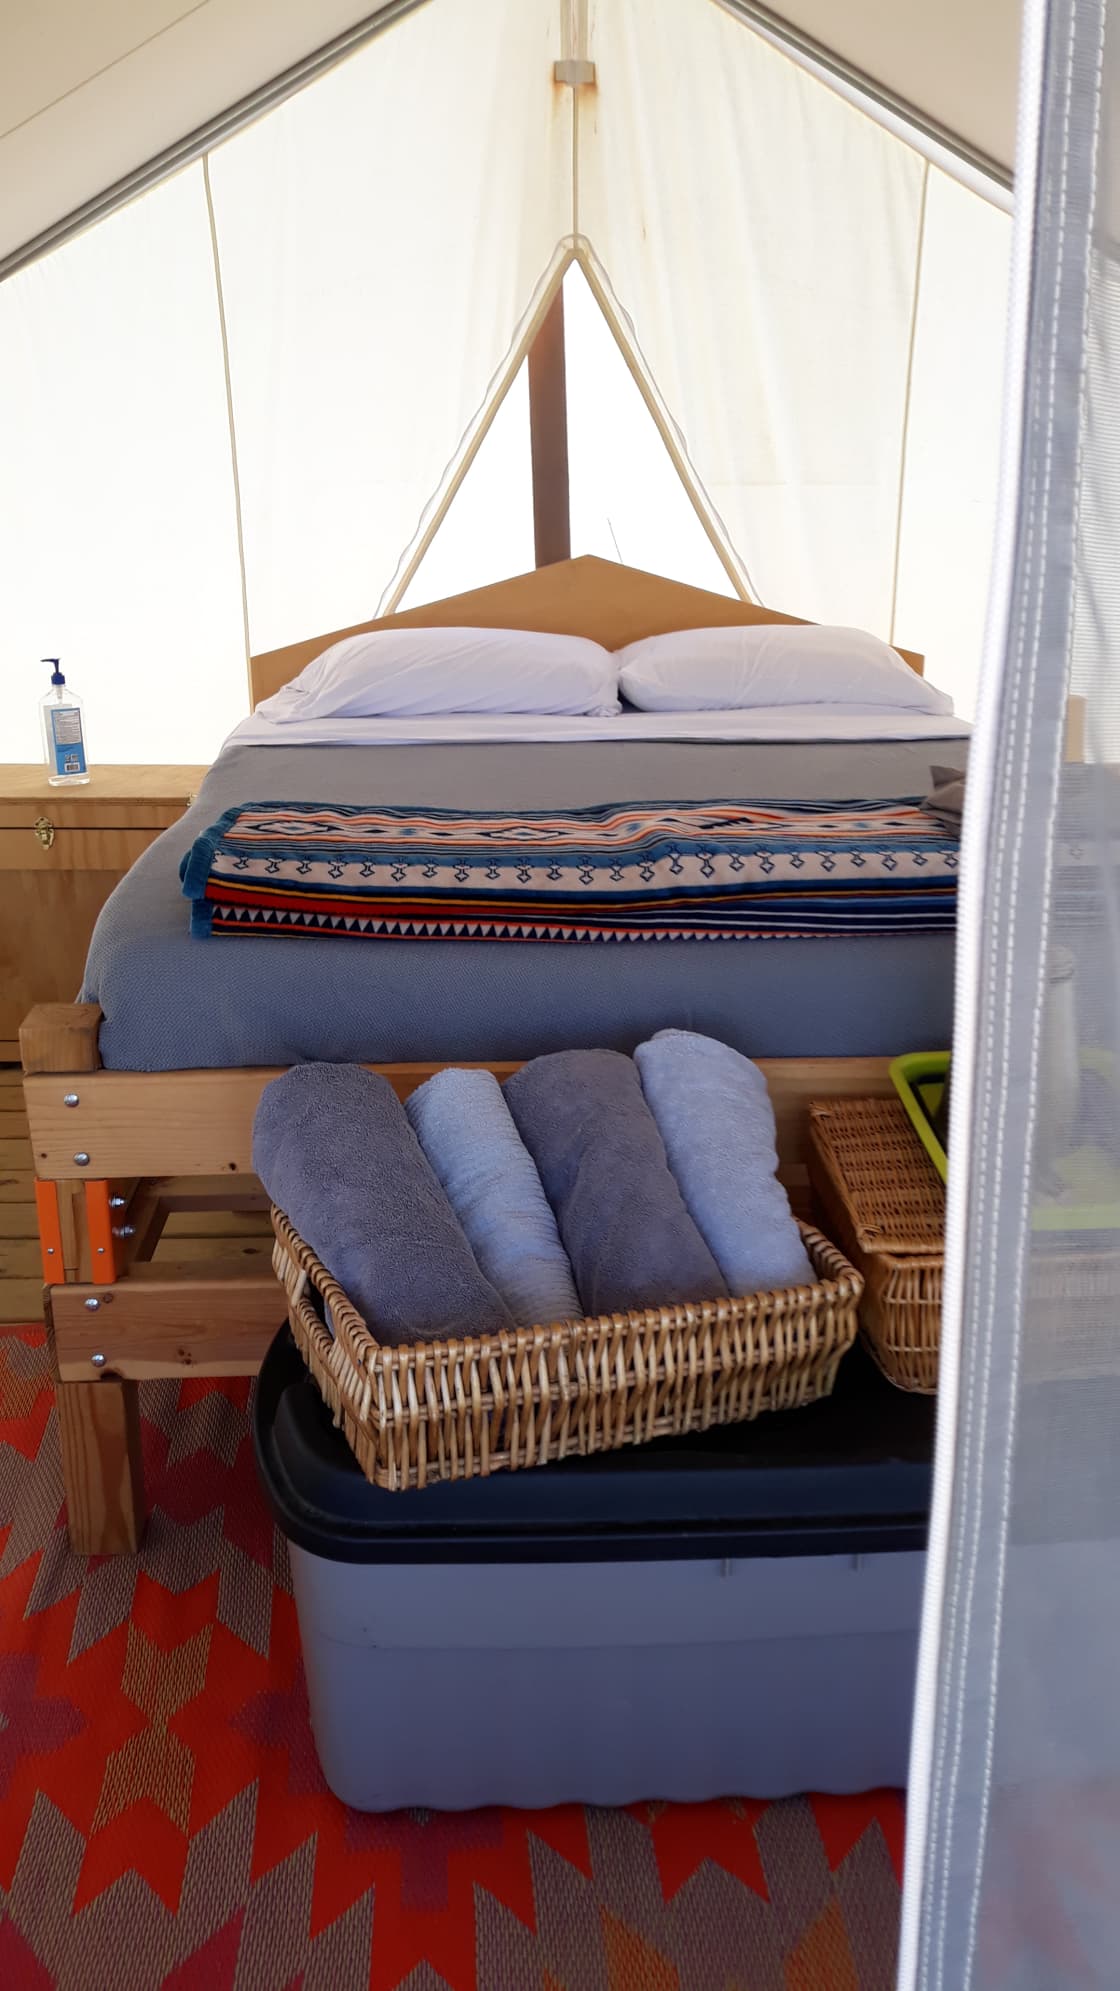 A queen sized bed with memory foam mattress makes this glamping at its best.